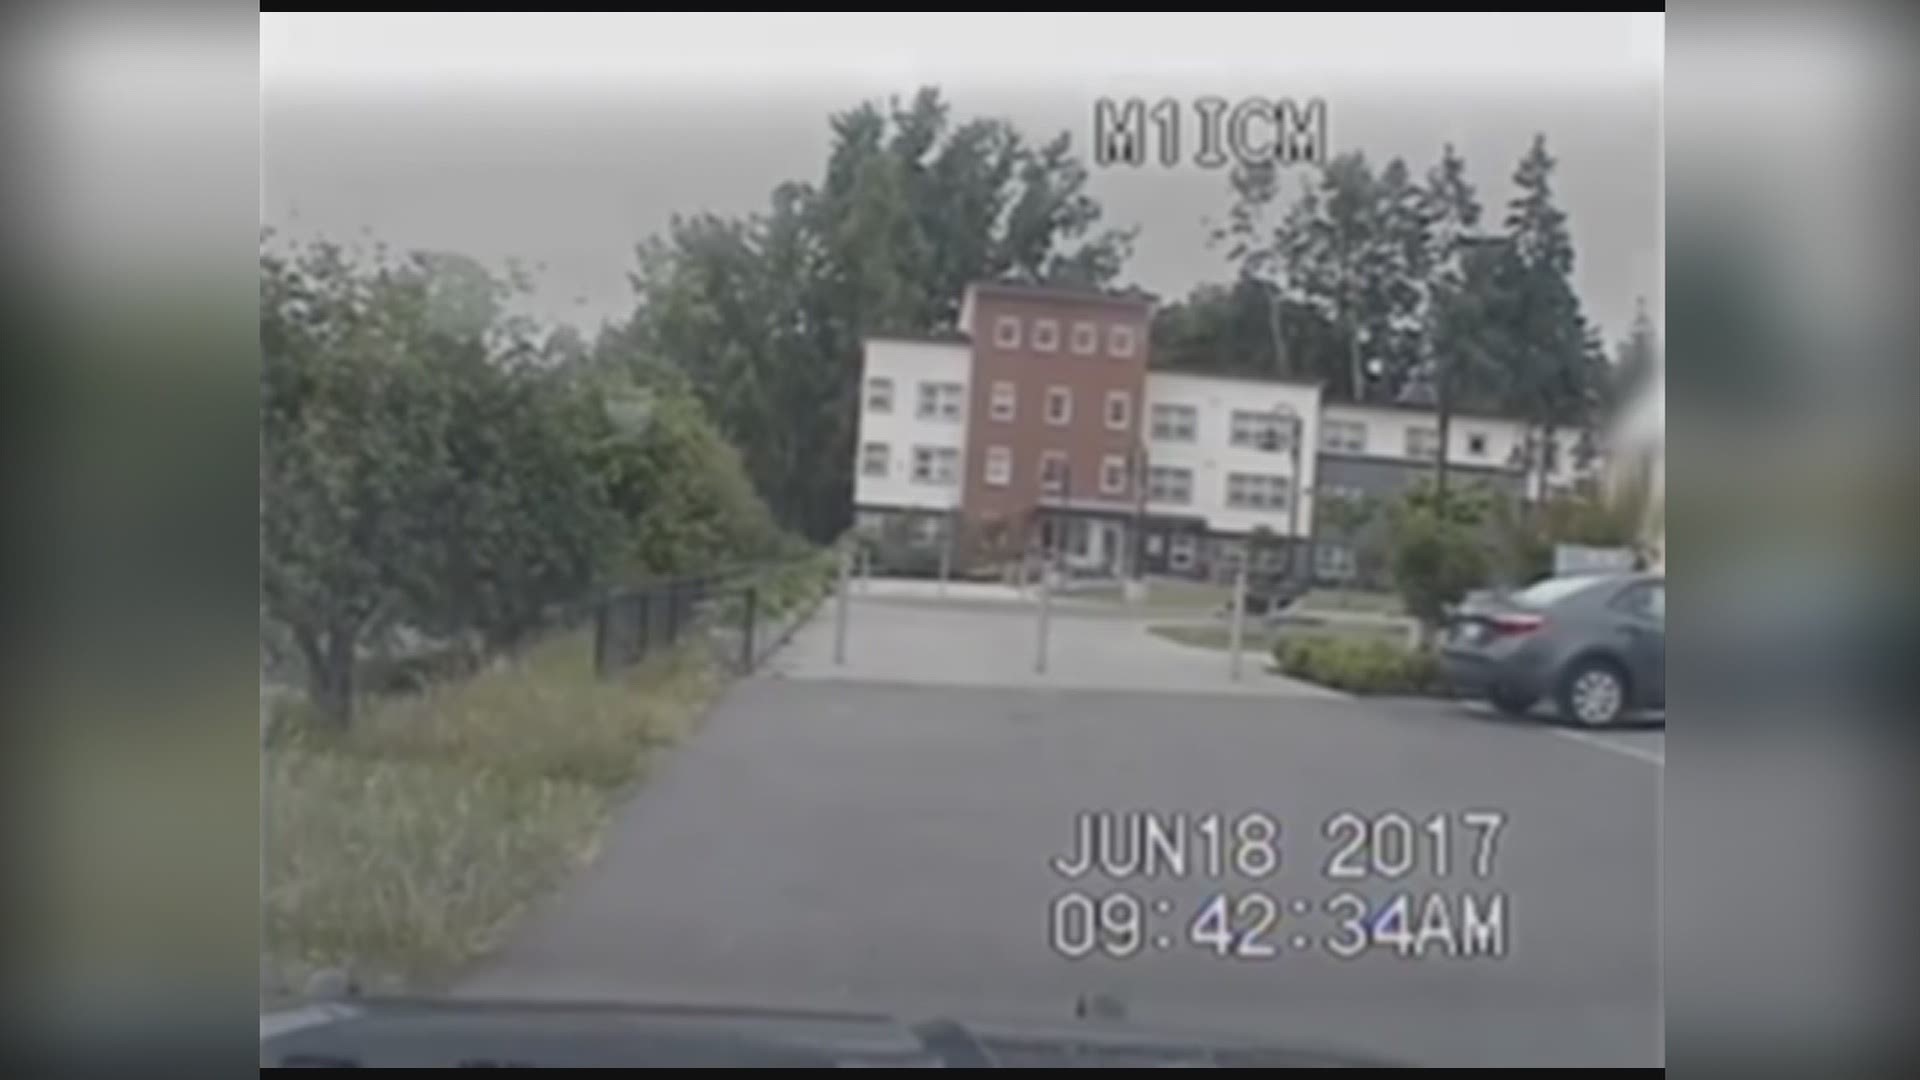 The video here was produced by a KING 5 editor, merging audio from a police dash camera with surveillance video. KING 5 cannot verify that the audio was synchronized accurately with the video. The video here is a "best guess" by KING and should not be viewed as a definitive recording of the fatal shooting of Charleena Lyles by Seattle Police officers that happened on June 18, 2017. This video was originally edited and published on June 19, 2017.